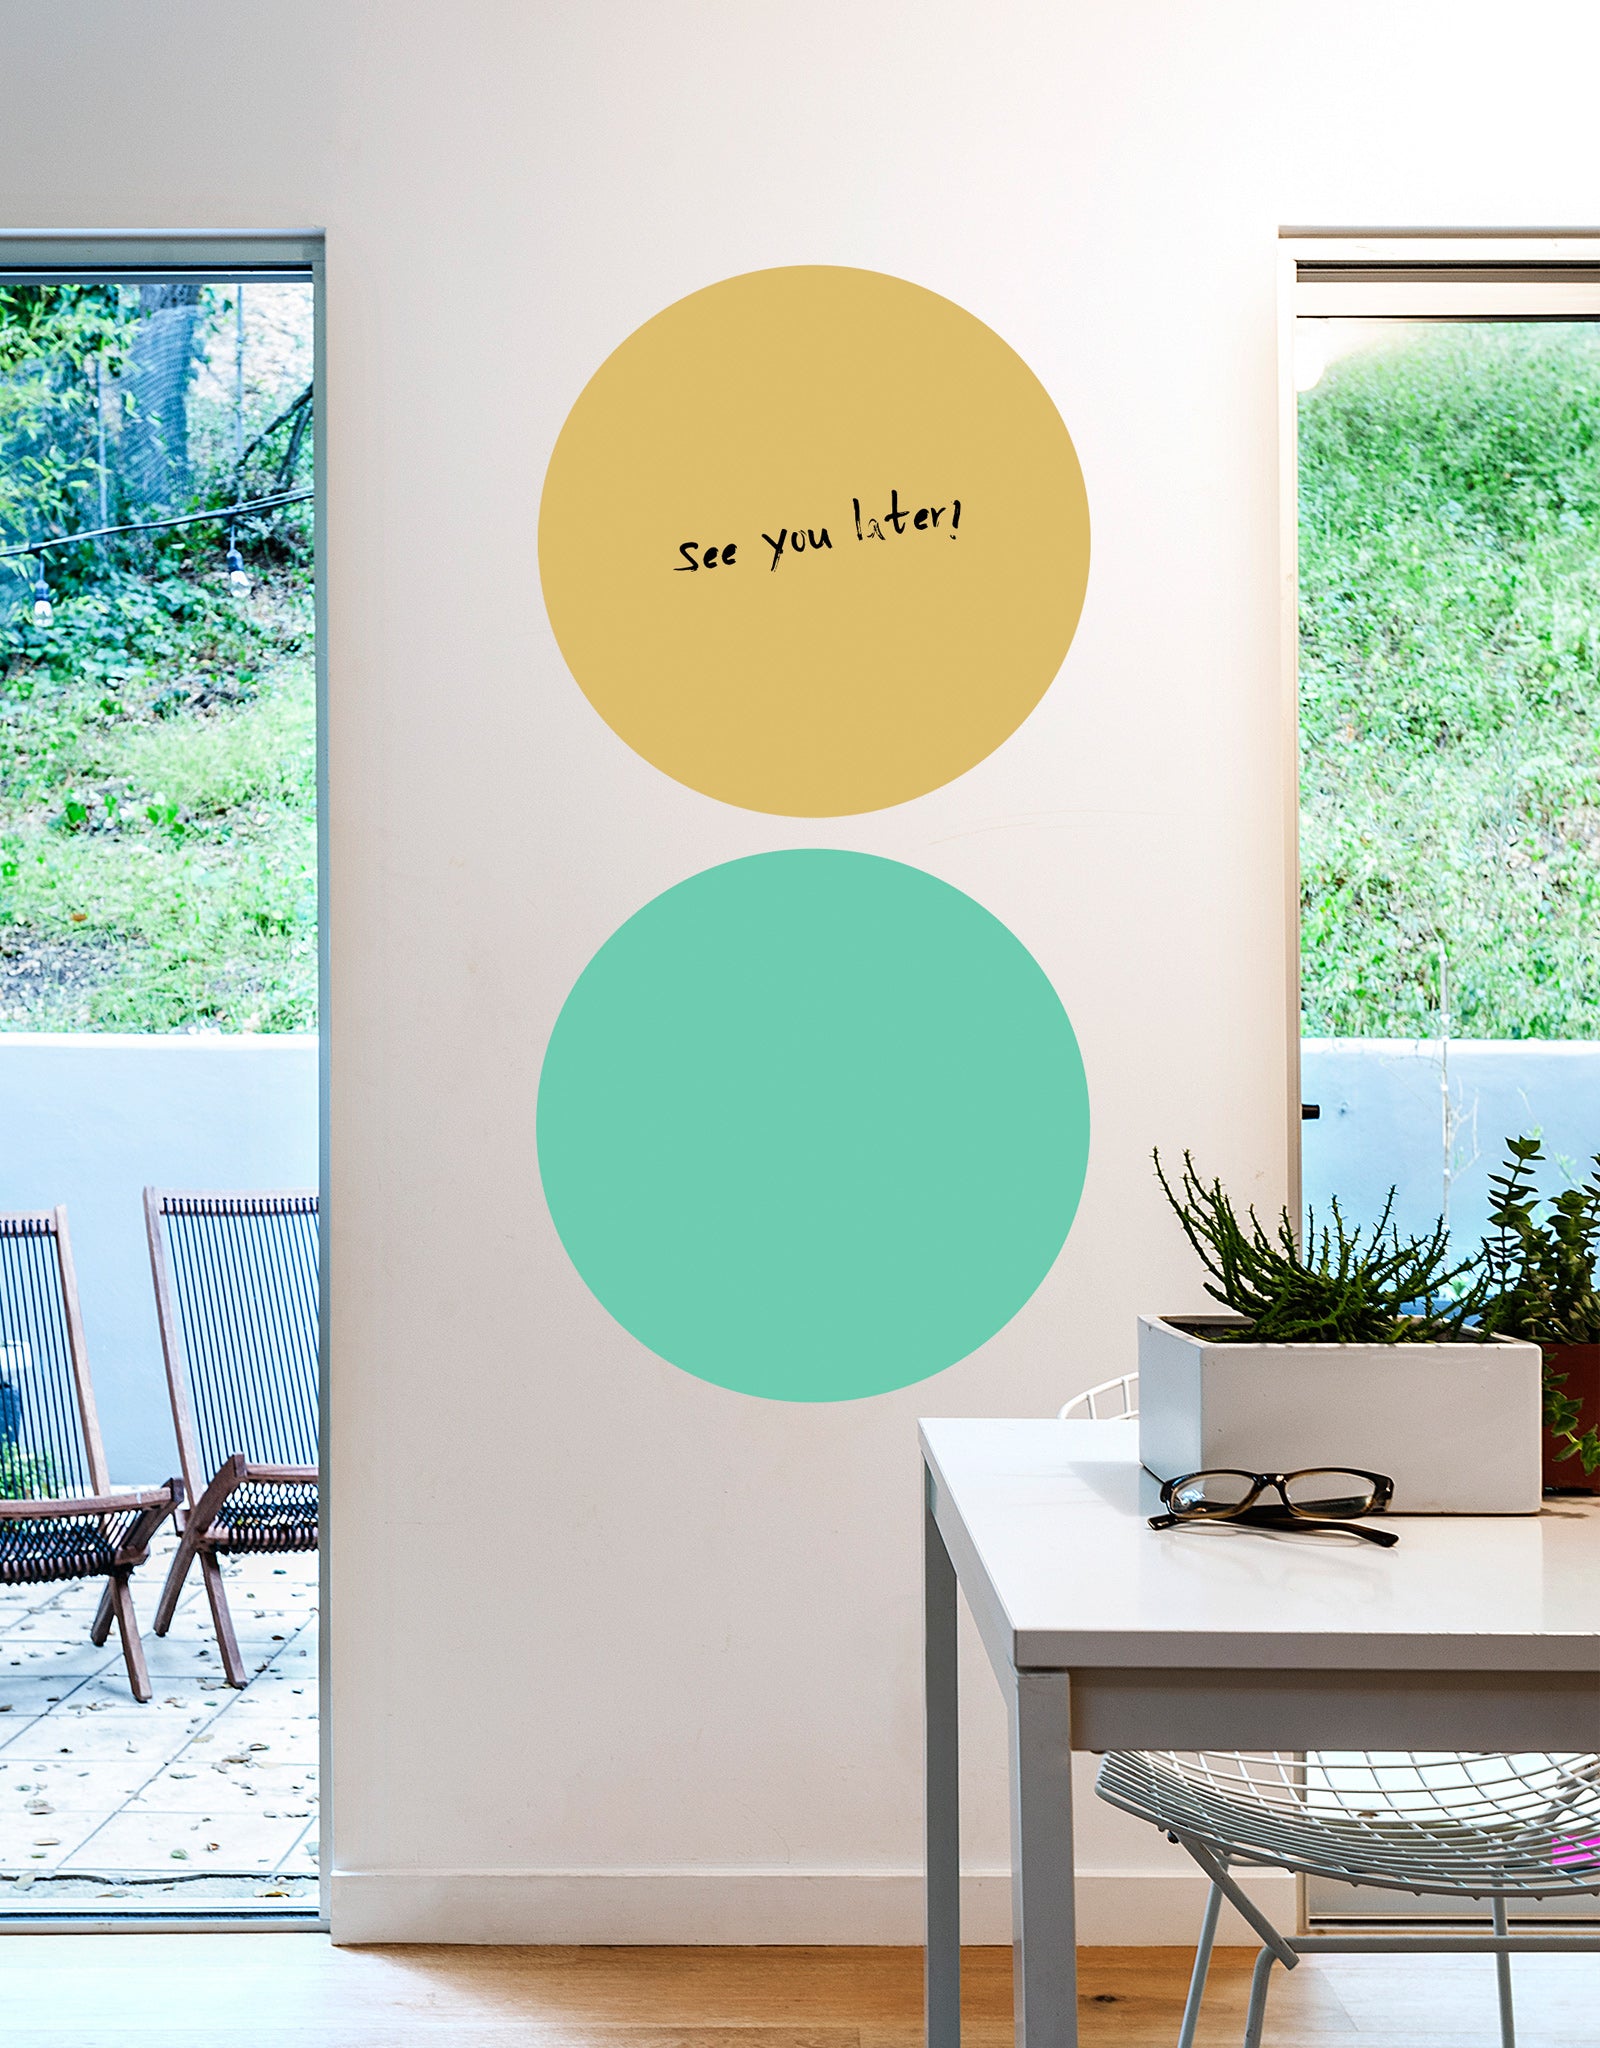 Dry Erase Circle Wall Decals Wall Decor Stickers